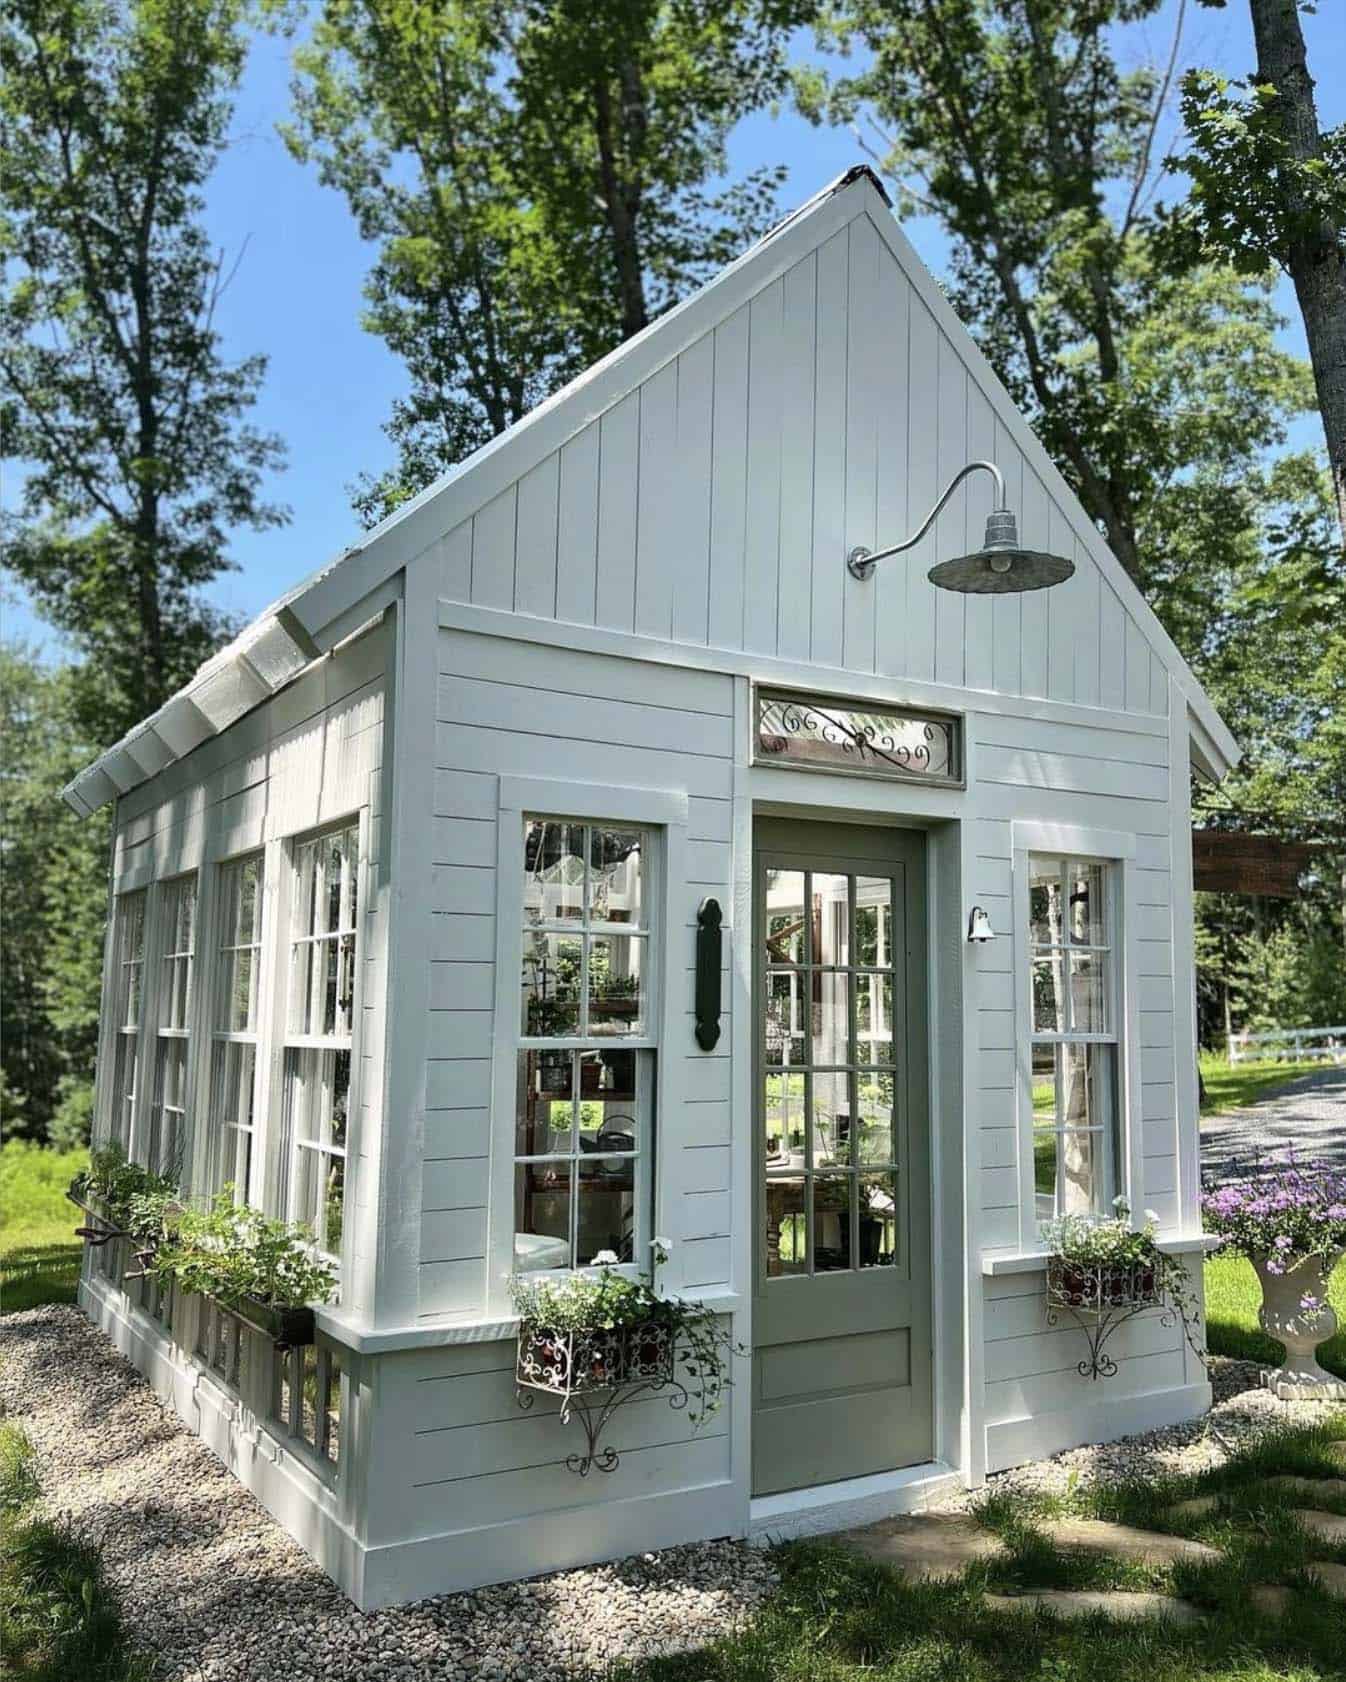 greenhouse exterior painted white with old windows and doors